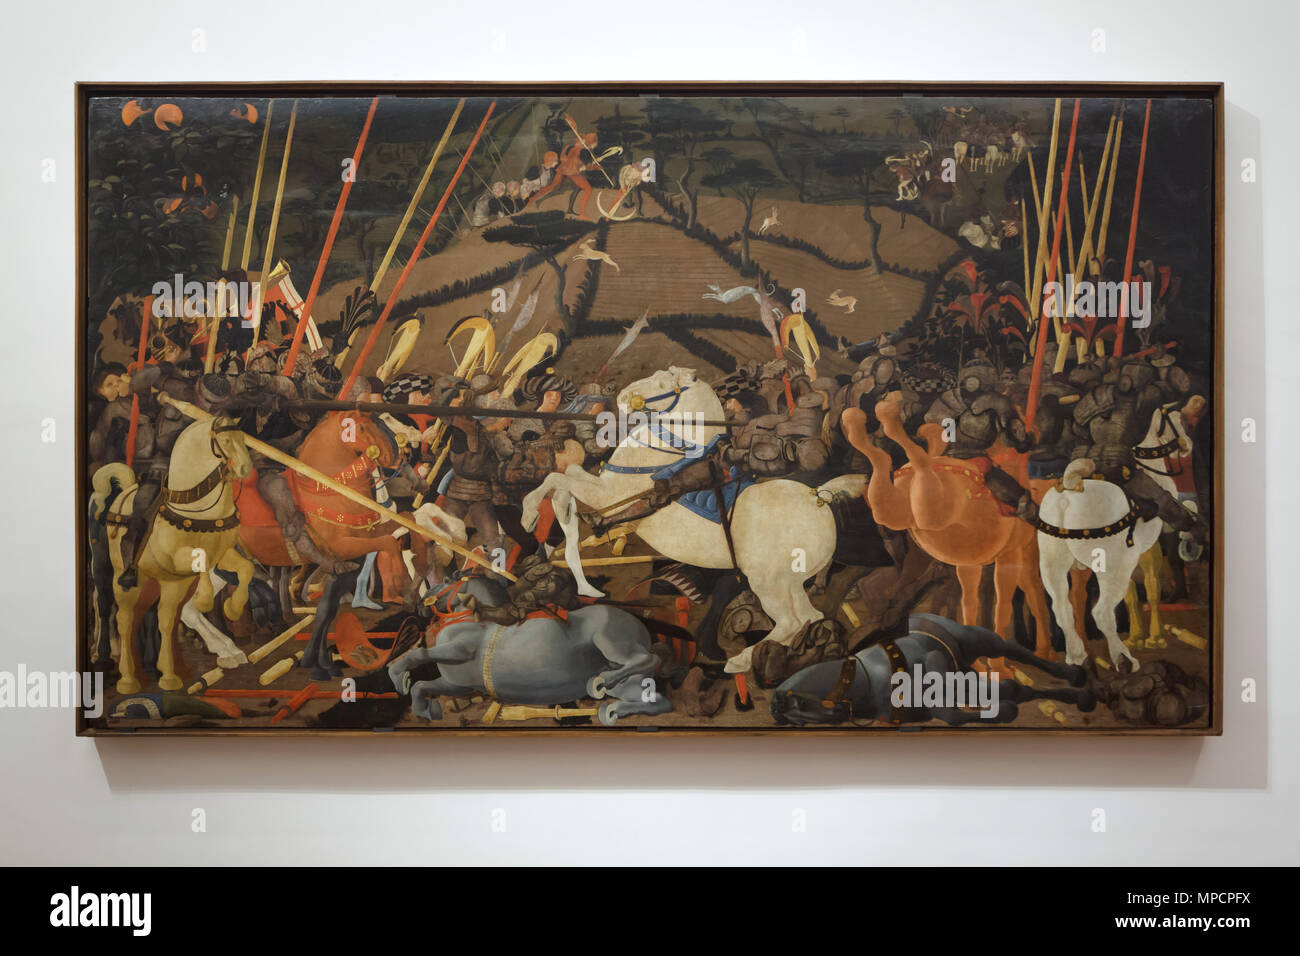 Painting 'The Battle of San Romano' (1435-1440) by Italian Renaissance painter Paolo Uccello on display in the Uffizi Gallery (Galleria degli Uffizi) in Florence, Tuscany, Italy. The painting is a part of a cycle of three paintings depicting a victory of the Florentines over the Sienese at San Romano near Pisa in 1432. Stock Photo